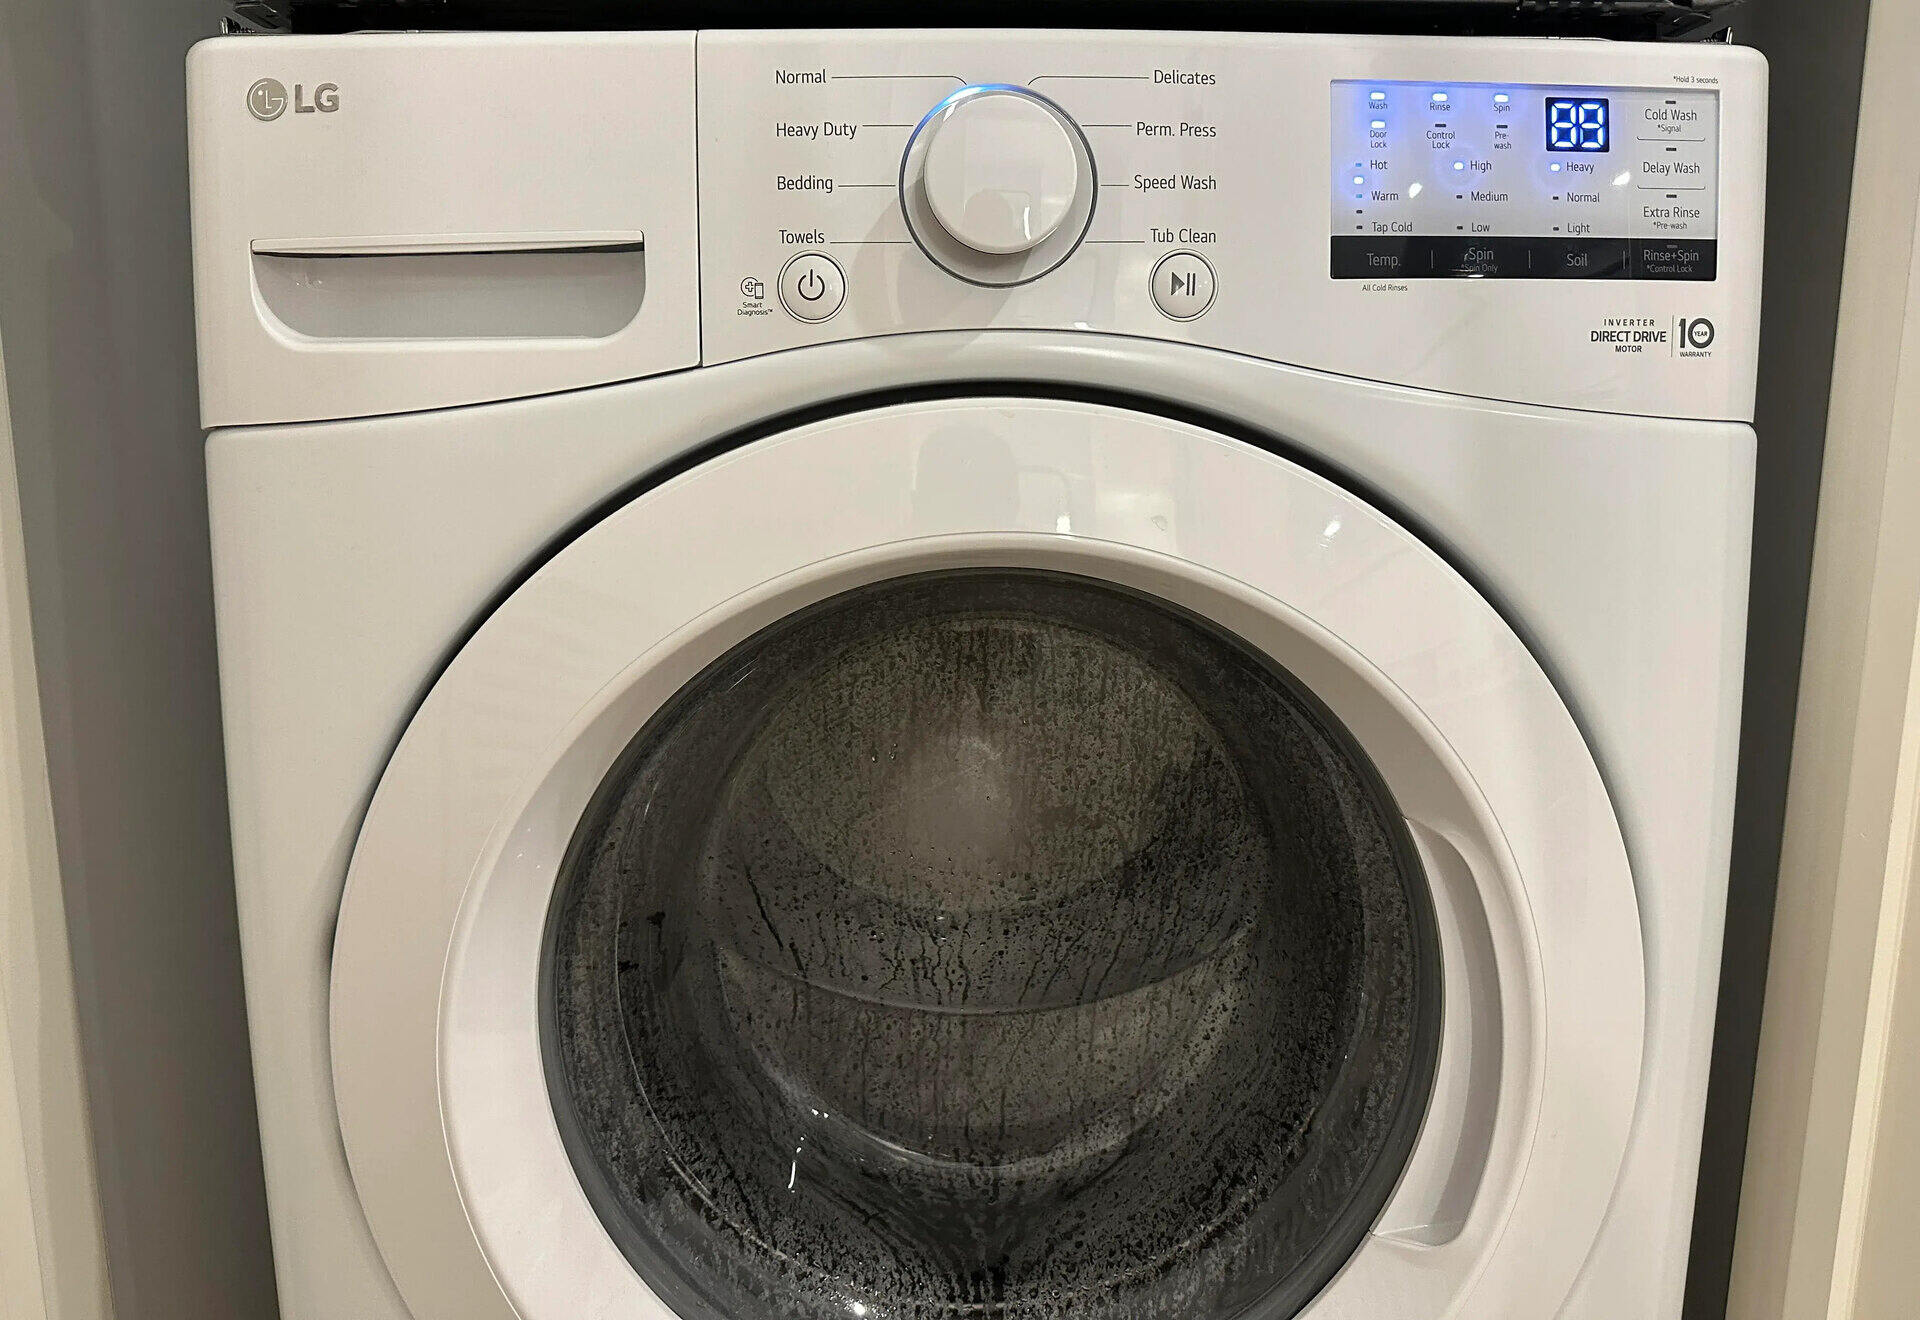 How To Fix The Error Code LE1 For LG Washing Machine